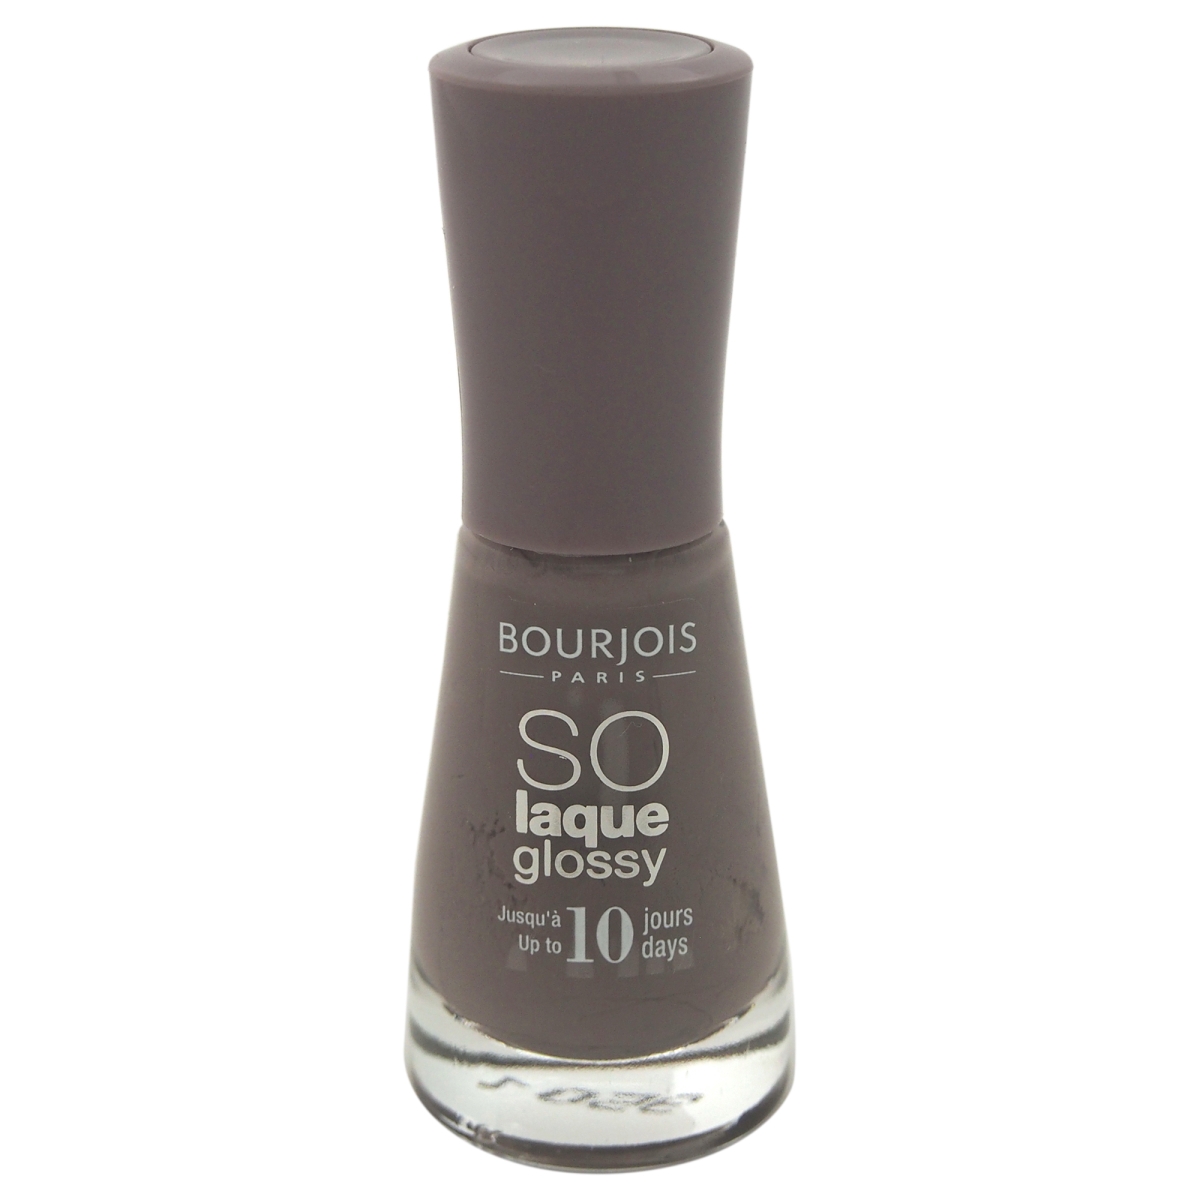 W-c-9676 0.3 Oz No. 05 So Laque Glossy Taupe Modele Nail Polish For Women